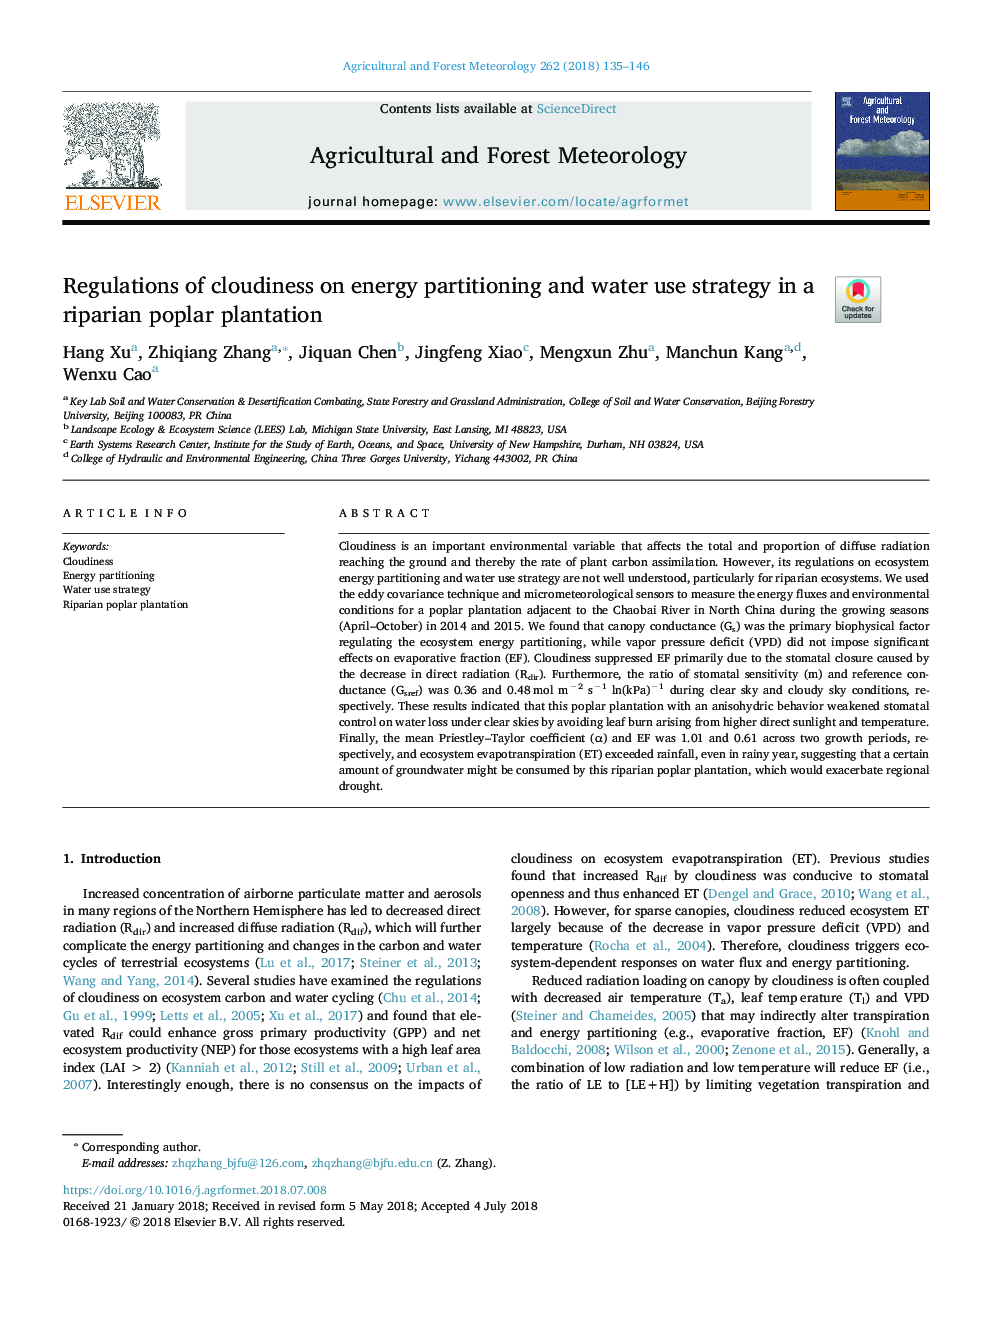 Regulations of cloudiness on energy partitioning and water use strategy in a riparian poplar plantation